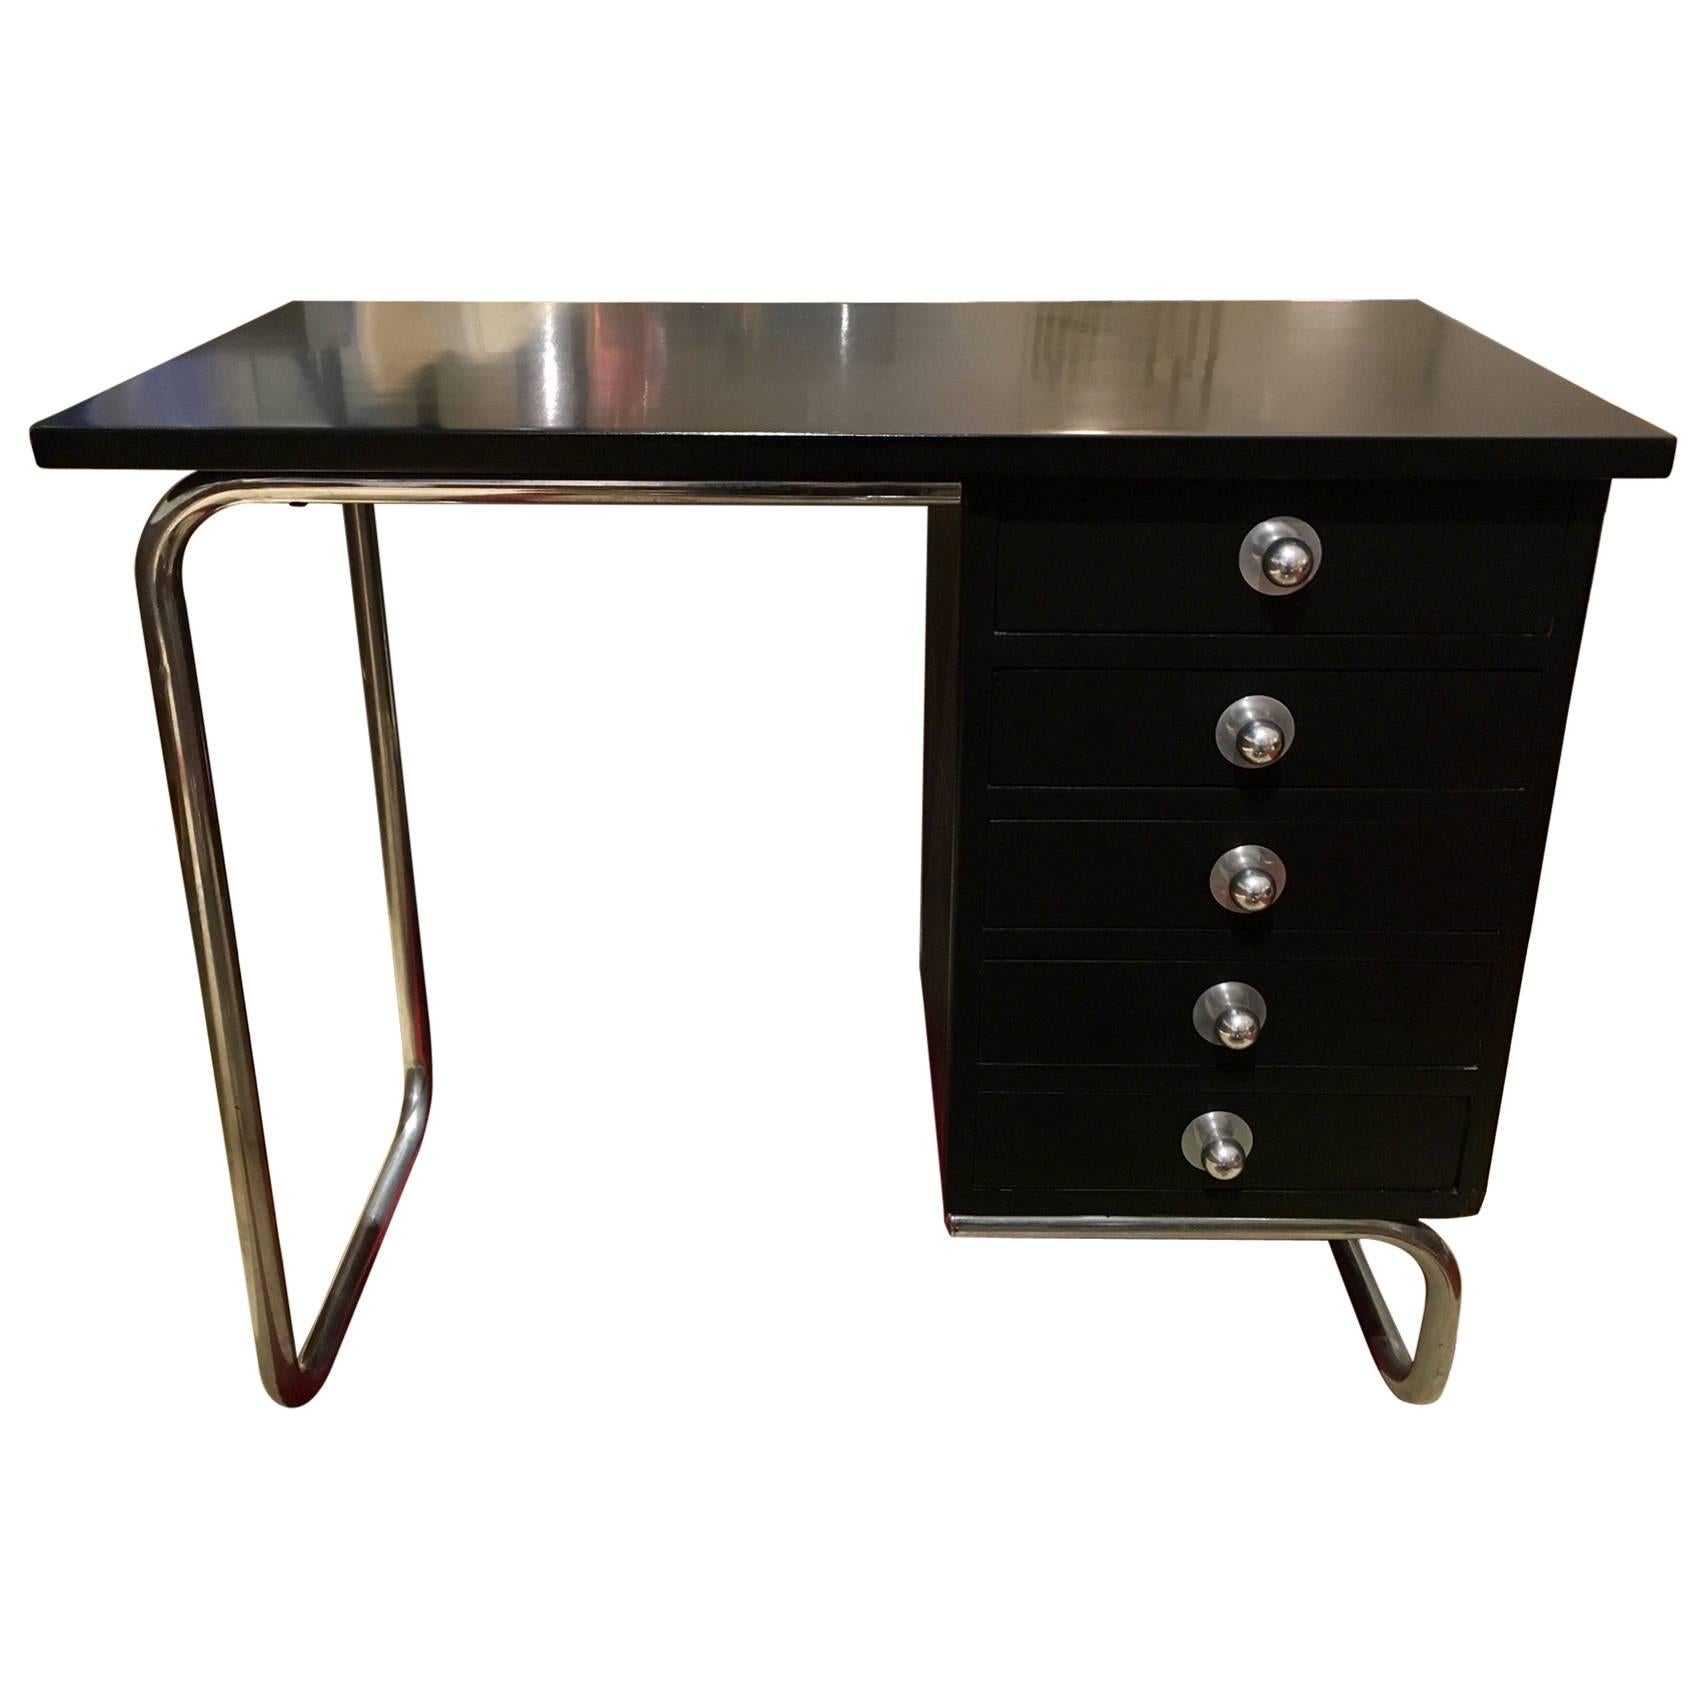 Black Lacquered Wood Desk with Tubular Steel Frame, circa 1935